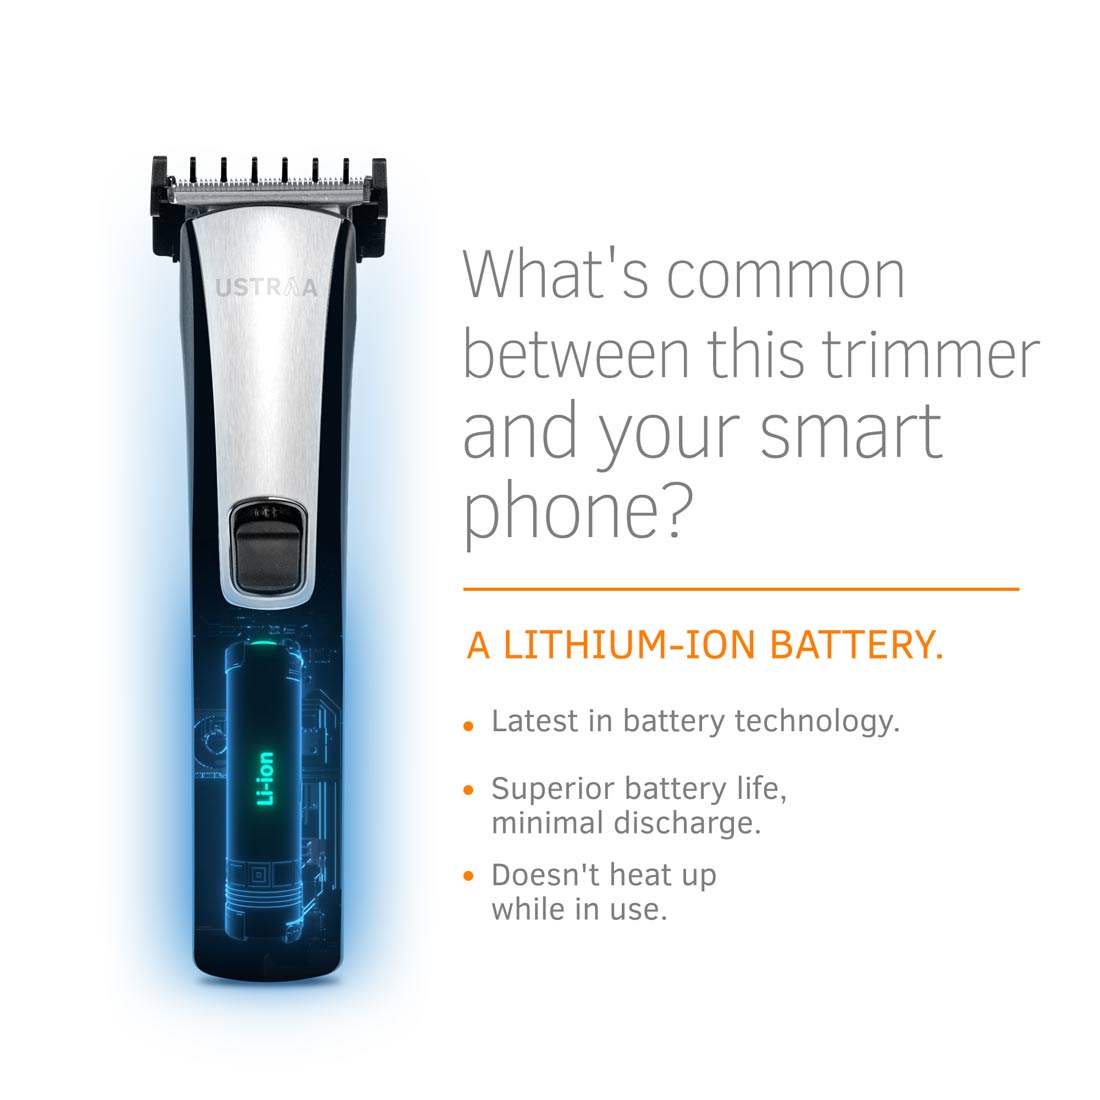 ustraa trimmer made in which country